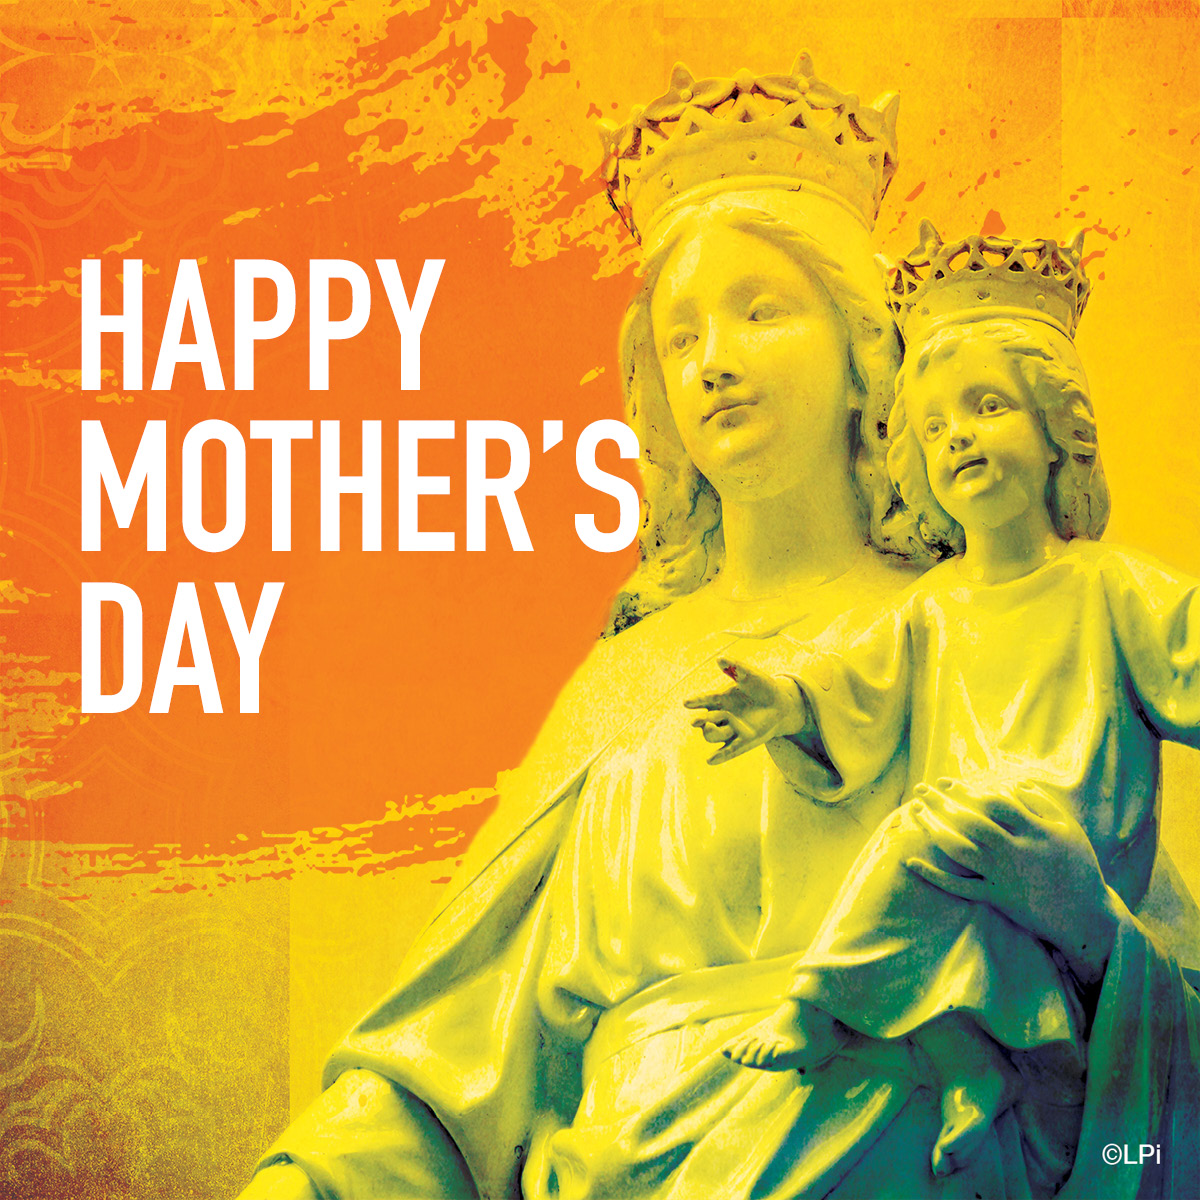 Happy Mother’s Day! 💕 We are thankful for our earthly mother’s for the gift of life and for our Blessed Mother for watching over us and interceding on our behalf. Join us for our Parish May Crowing today at 10am and 12:30pm Masses.